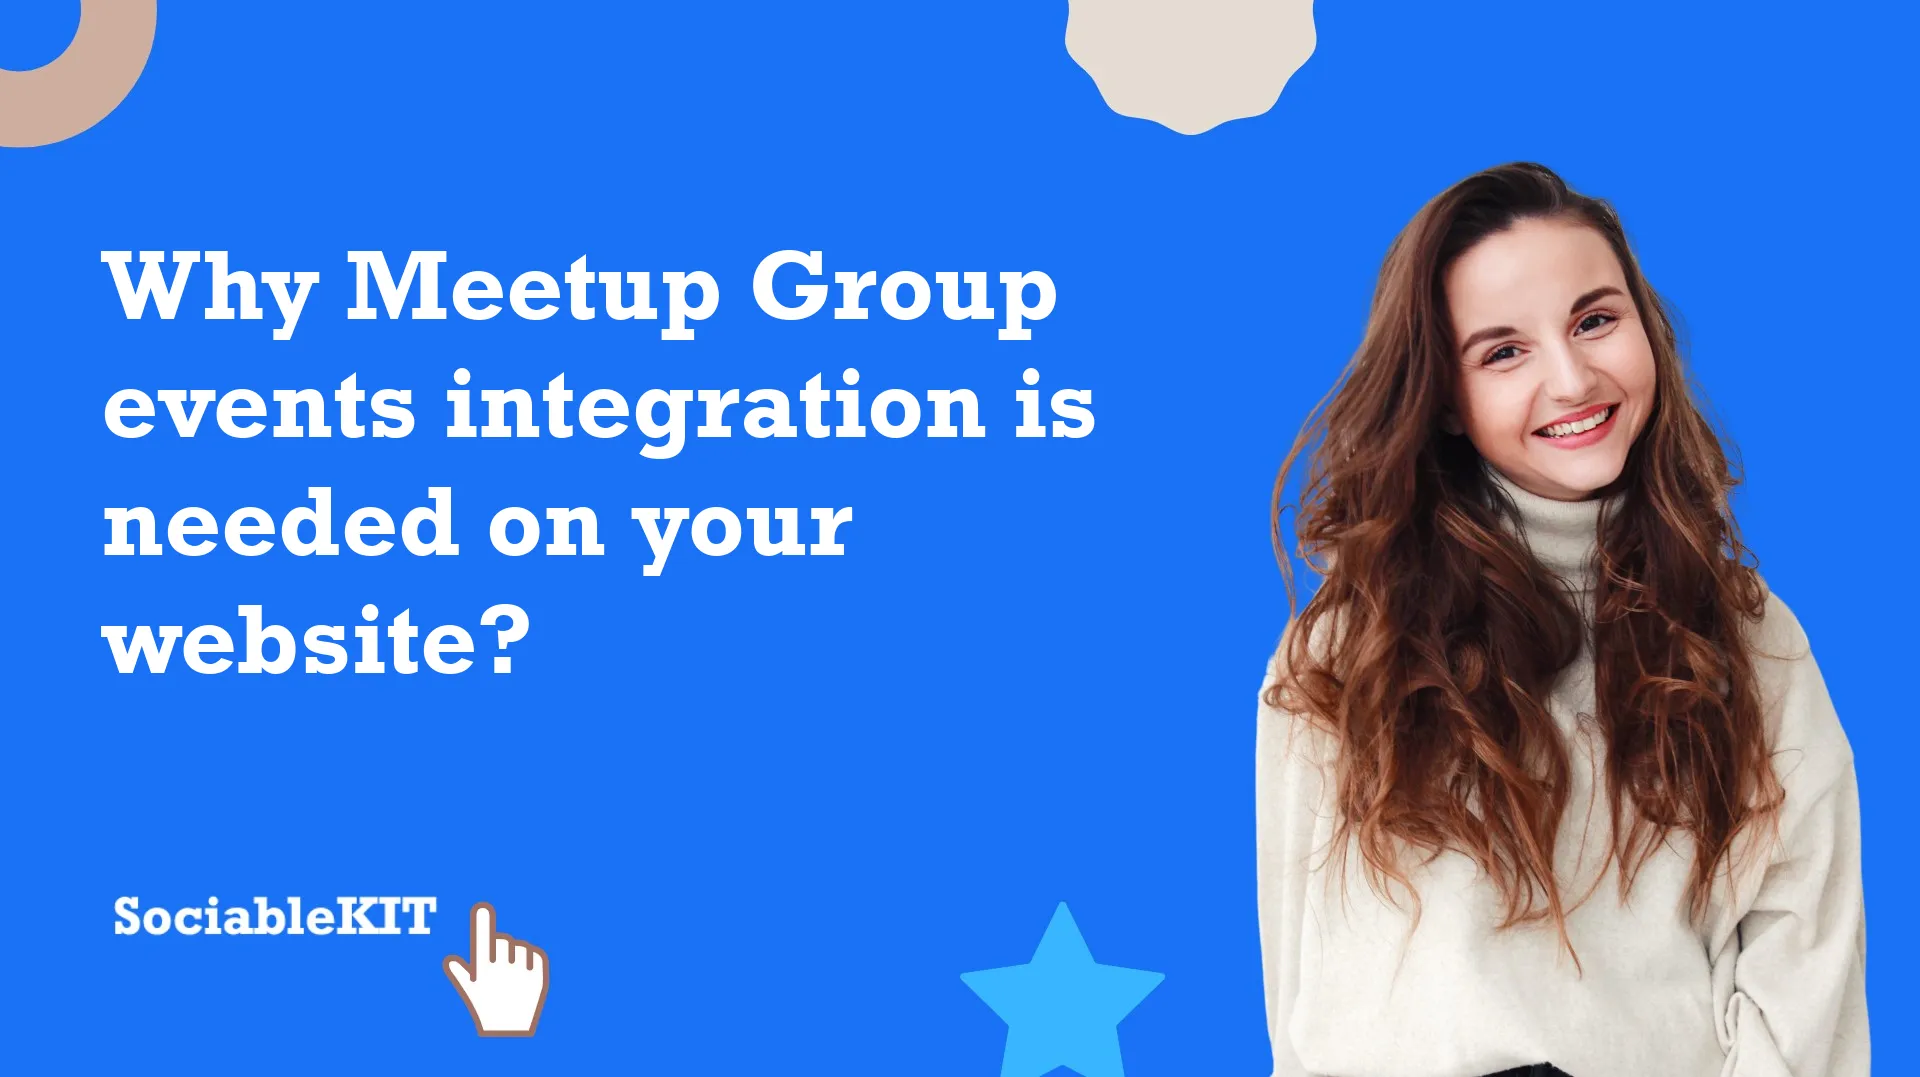 Why Meetup Group events integration is needed on your website?